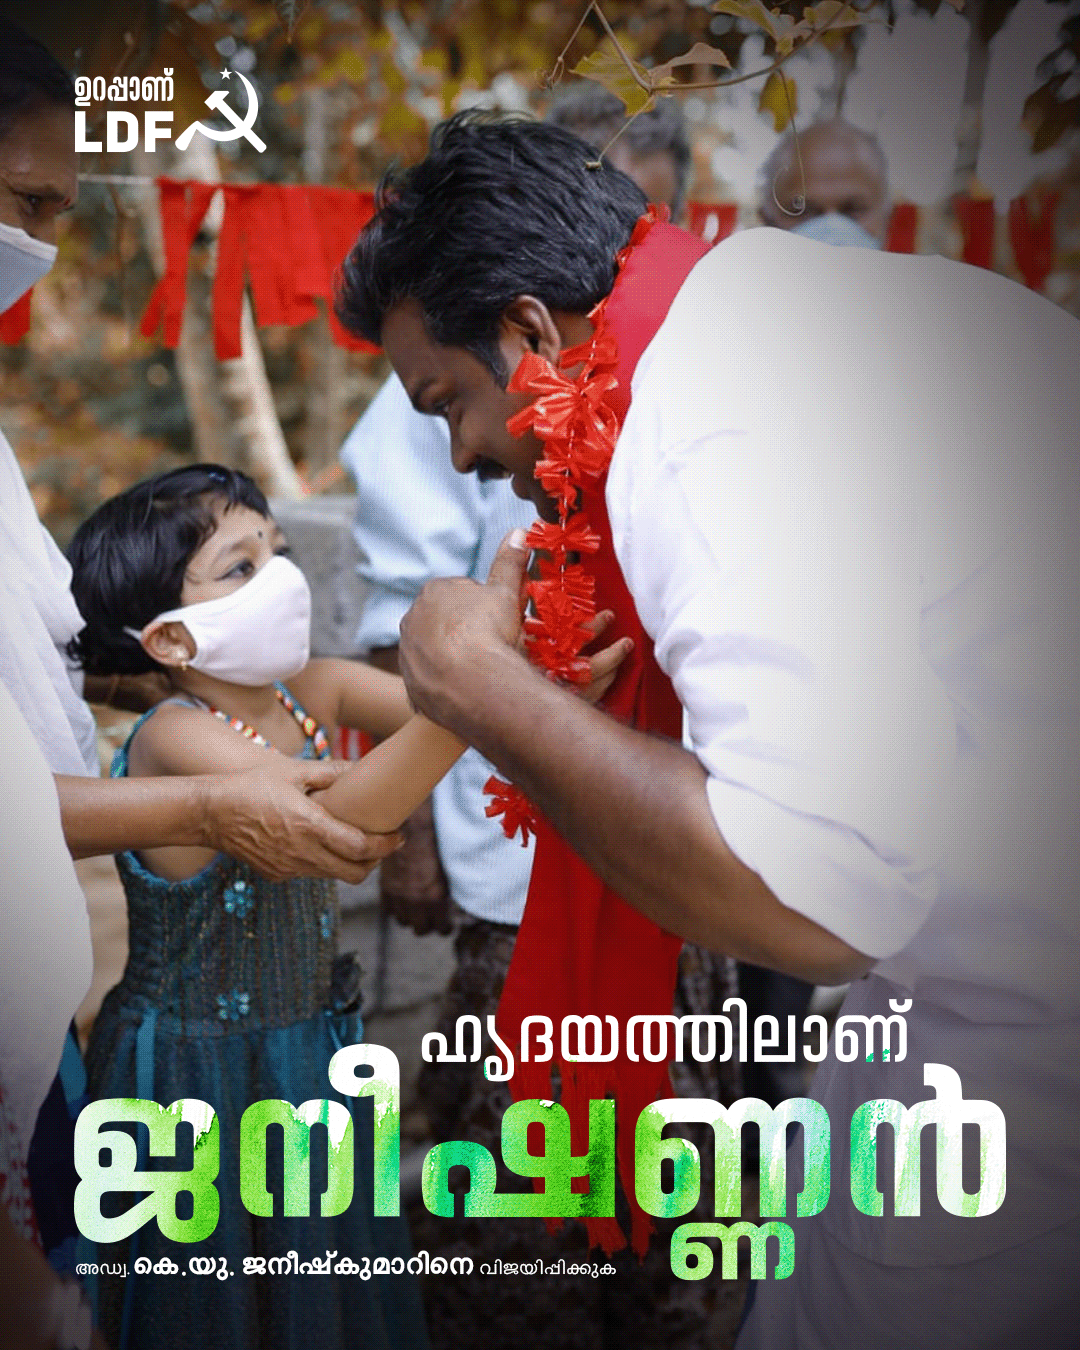 election campaign Election poster KERALA ELECTION POSTER Political campaign Poster Design